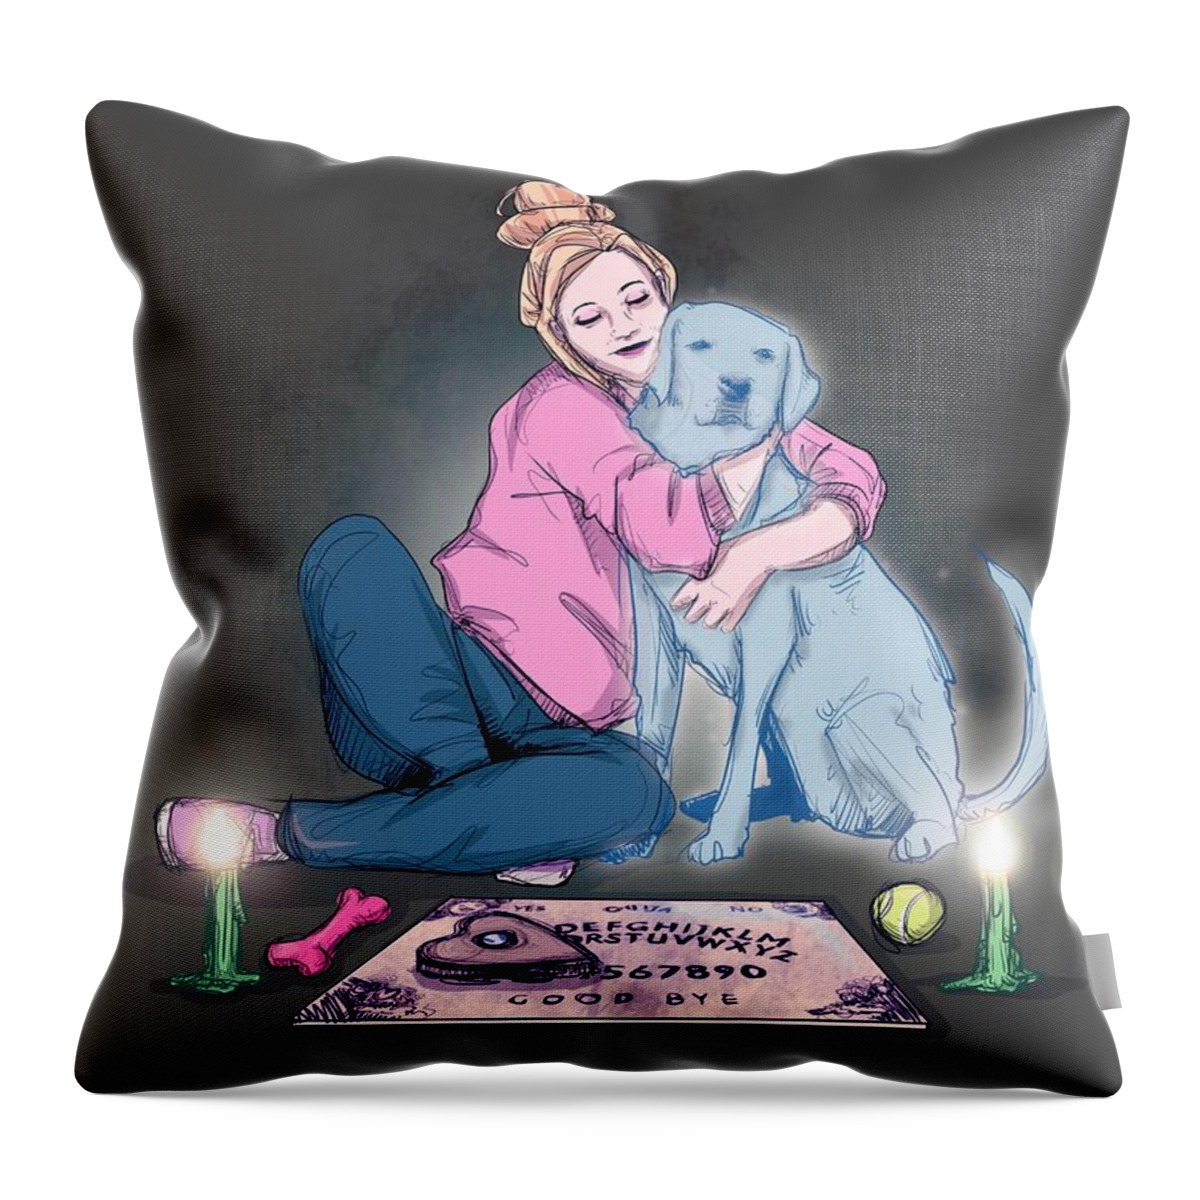 Good Boy Throw Pillow featuring the drawing Good Boy by Ludwig Van Bacon